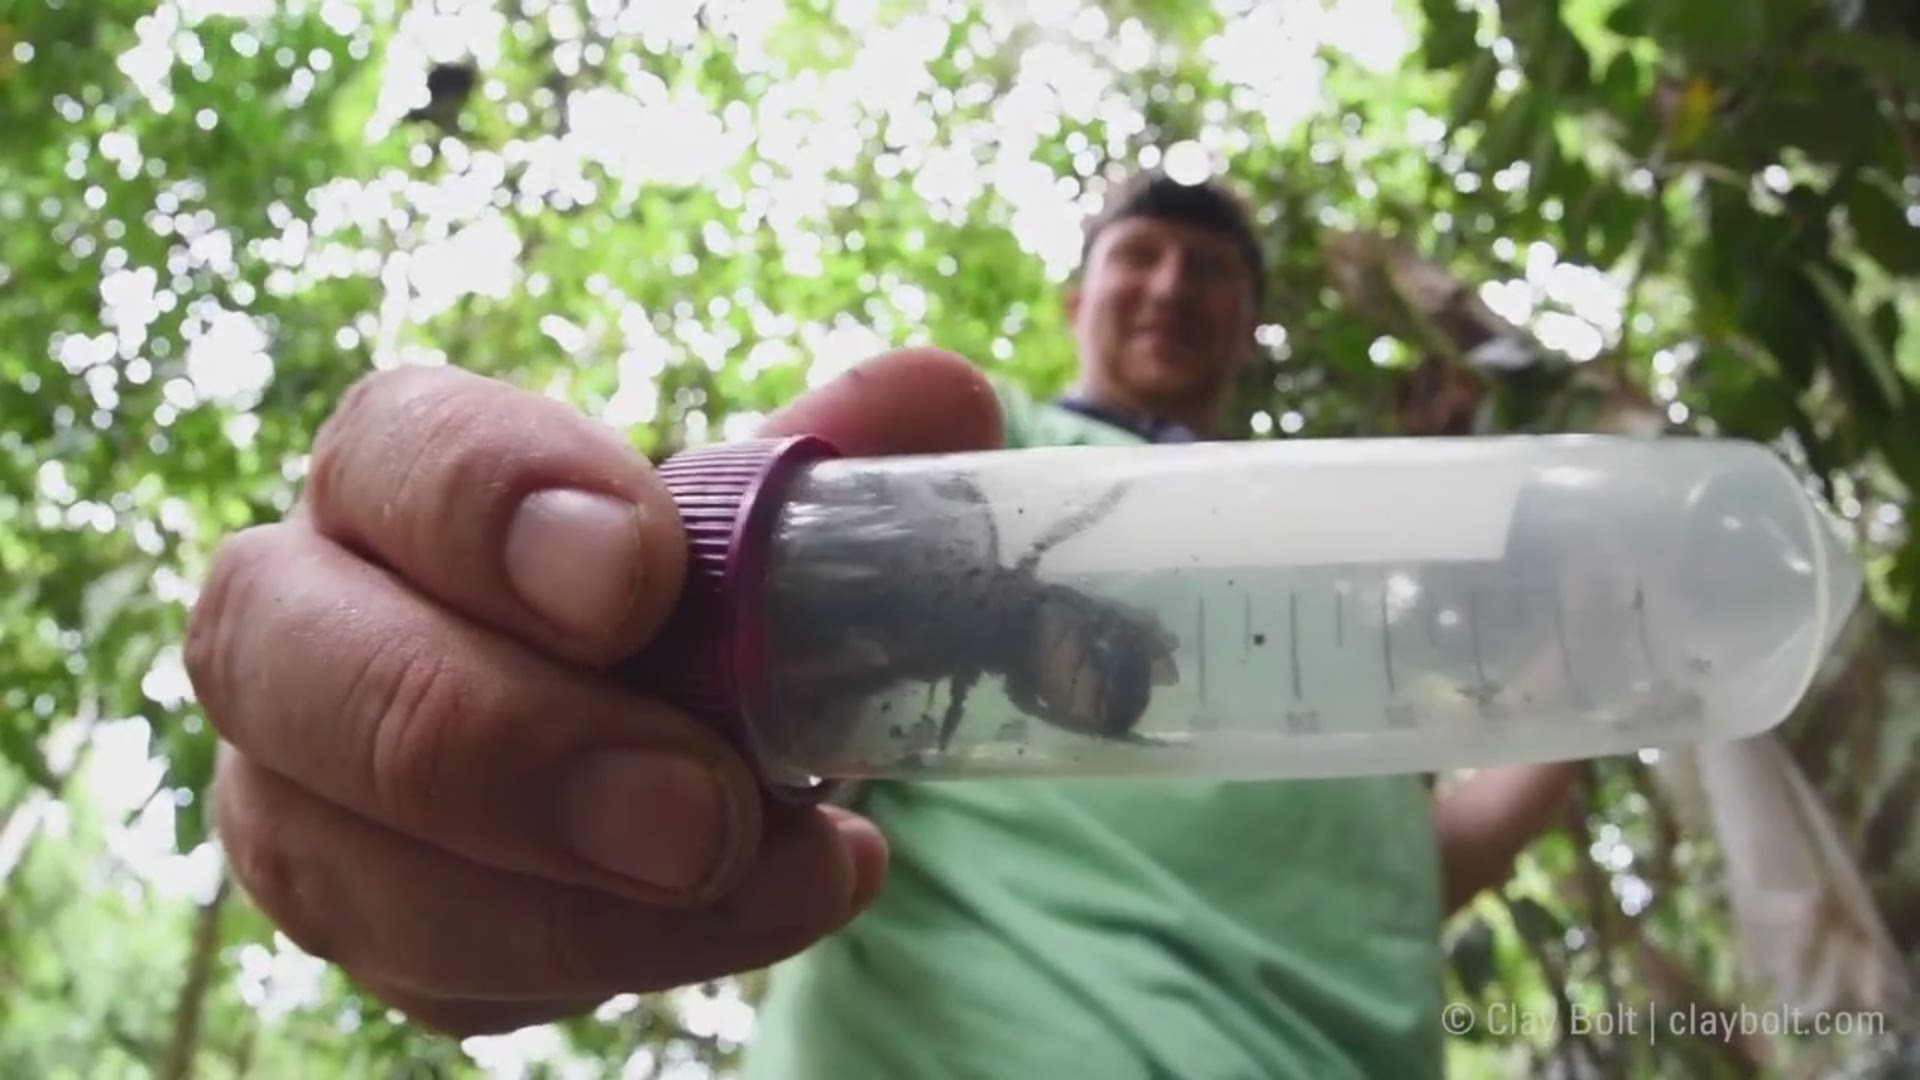 They found the 'holy grail' of bees and its terrifying